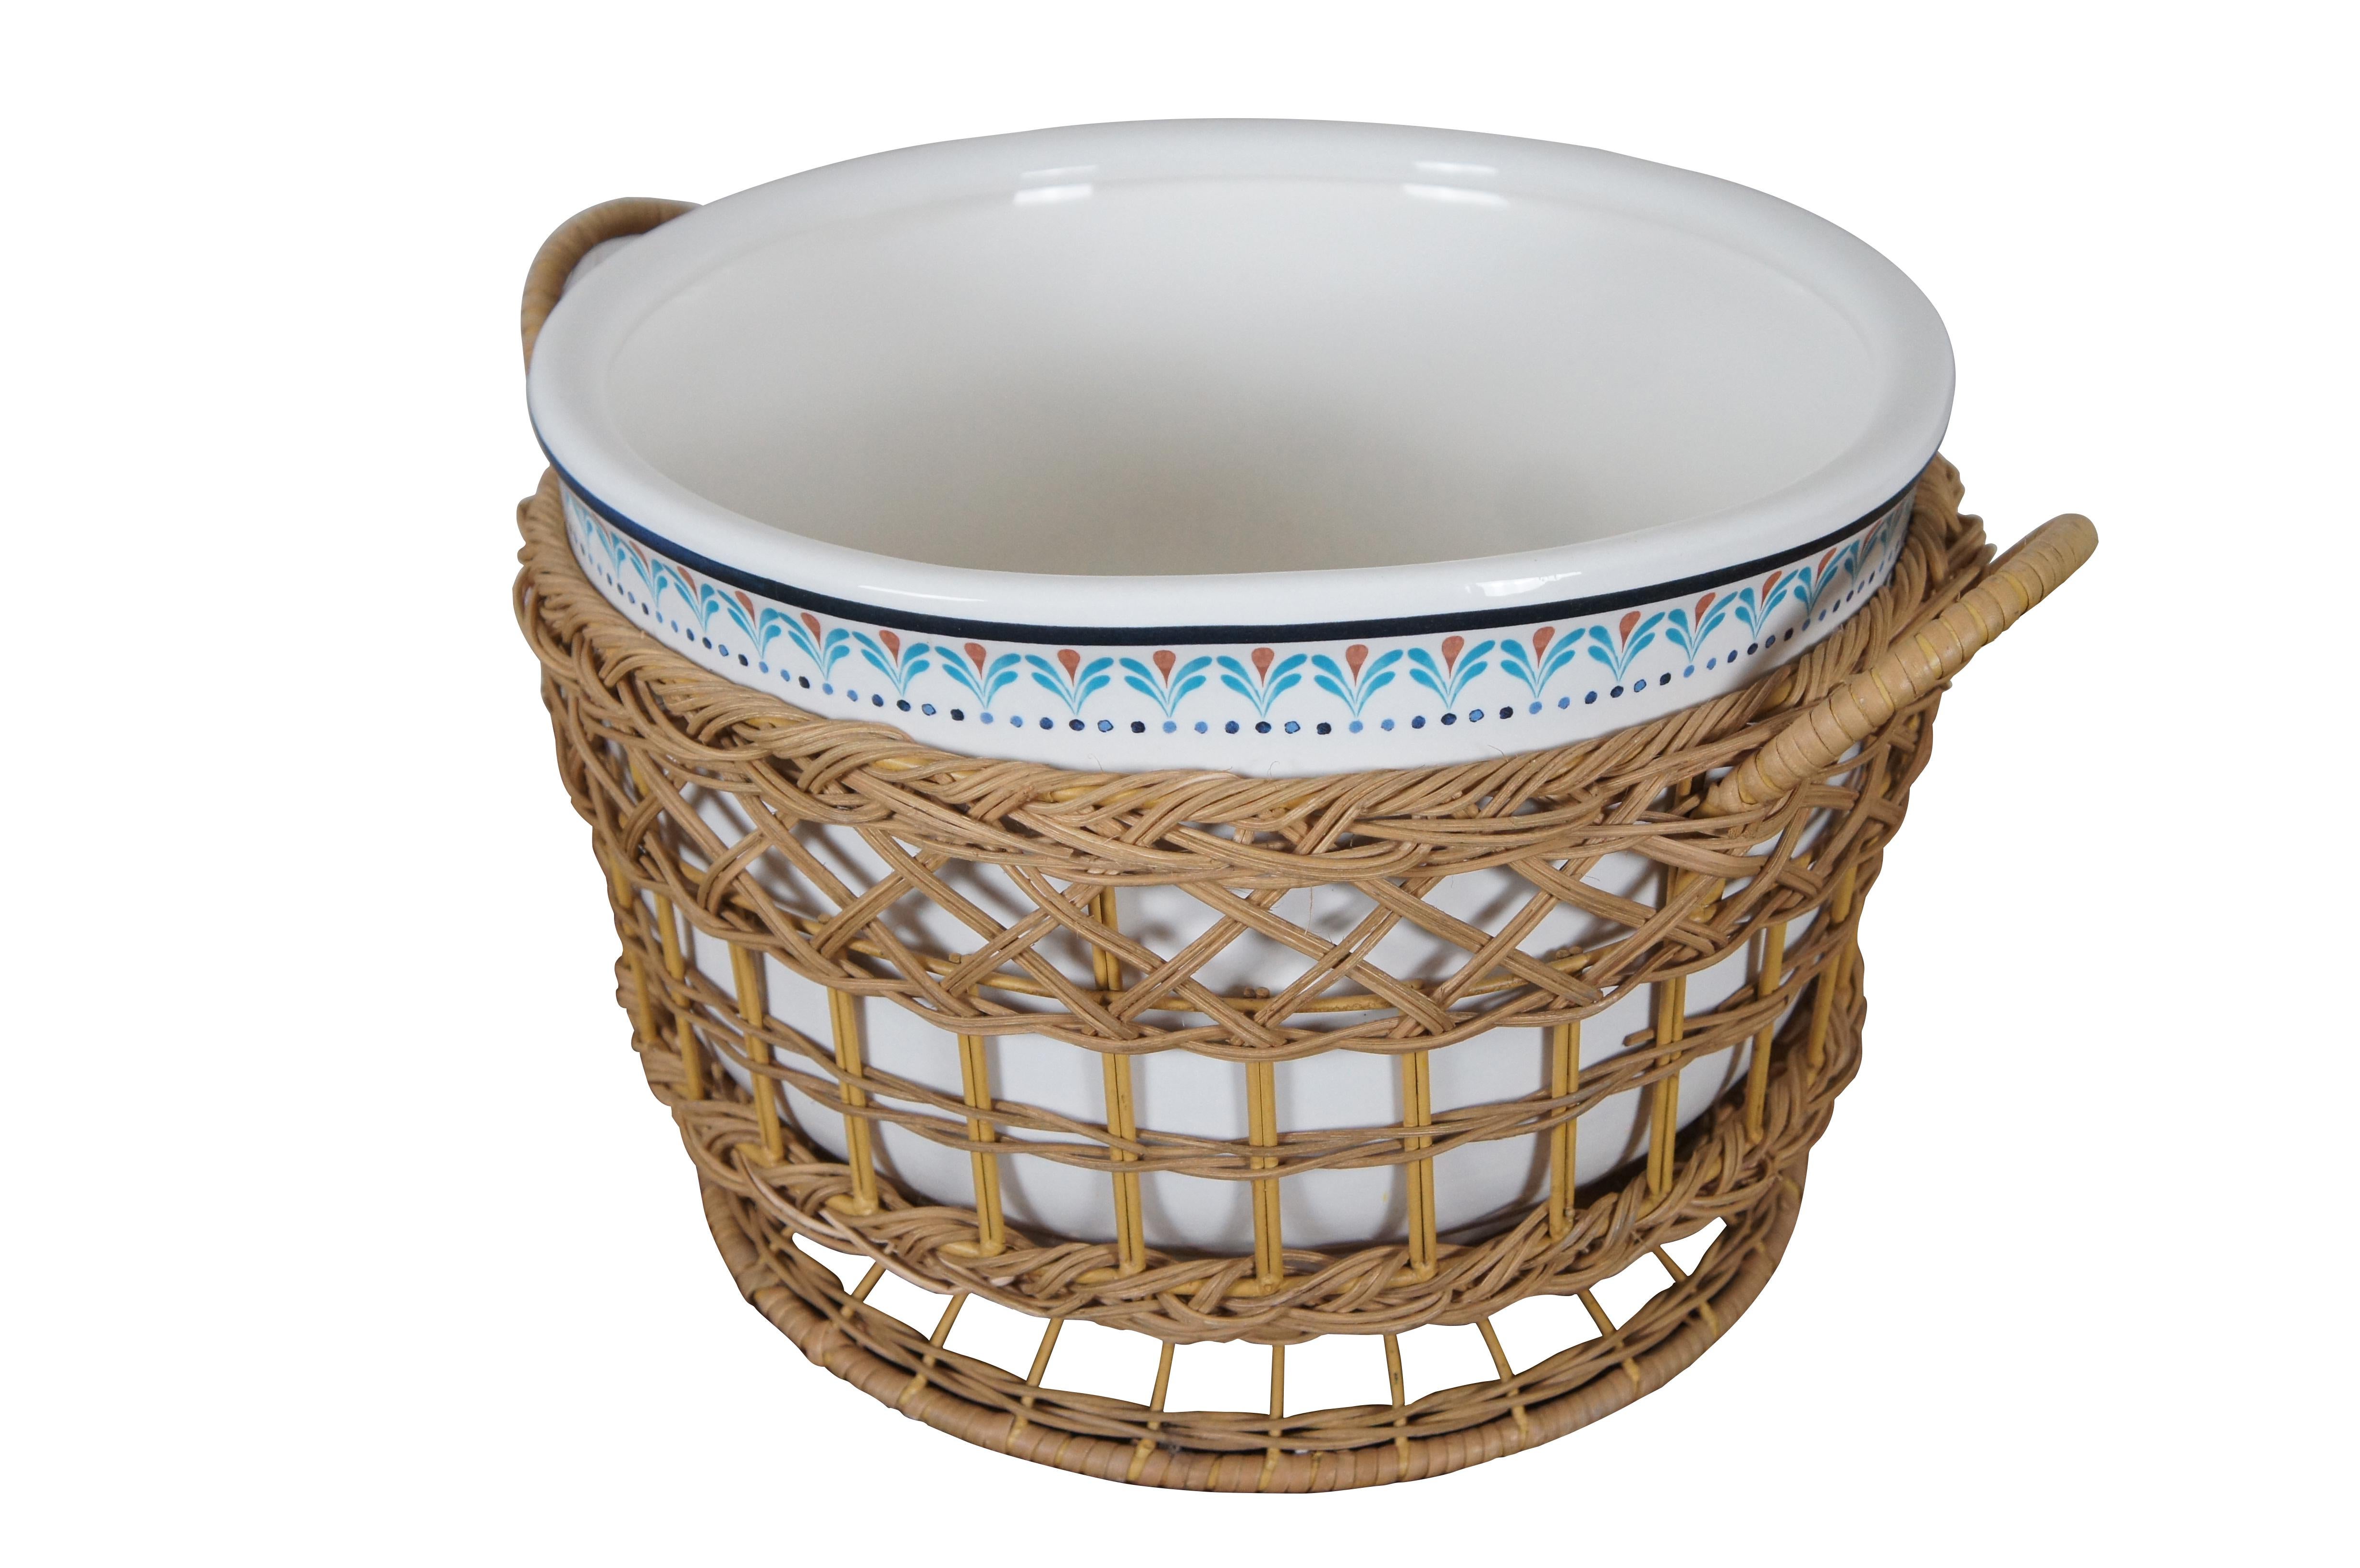 An upbeat tone for any gathering with a vibrantly hand painted floral motif and handwoven rattan. The simple artisanal charm and complementary colors of the handcrafted ceramic piece will pair beautifully with other tableware.

Dimensions:
19